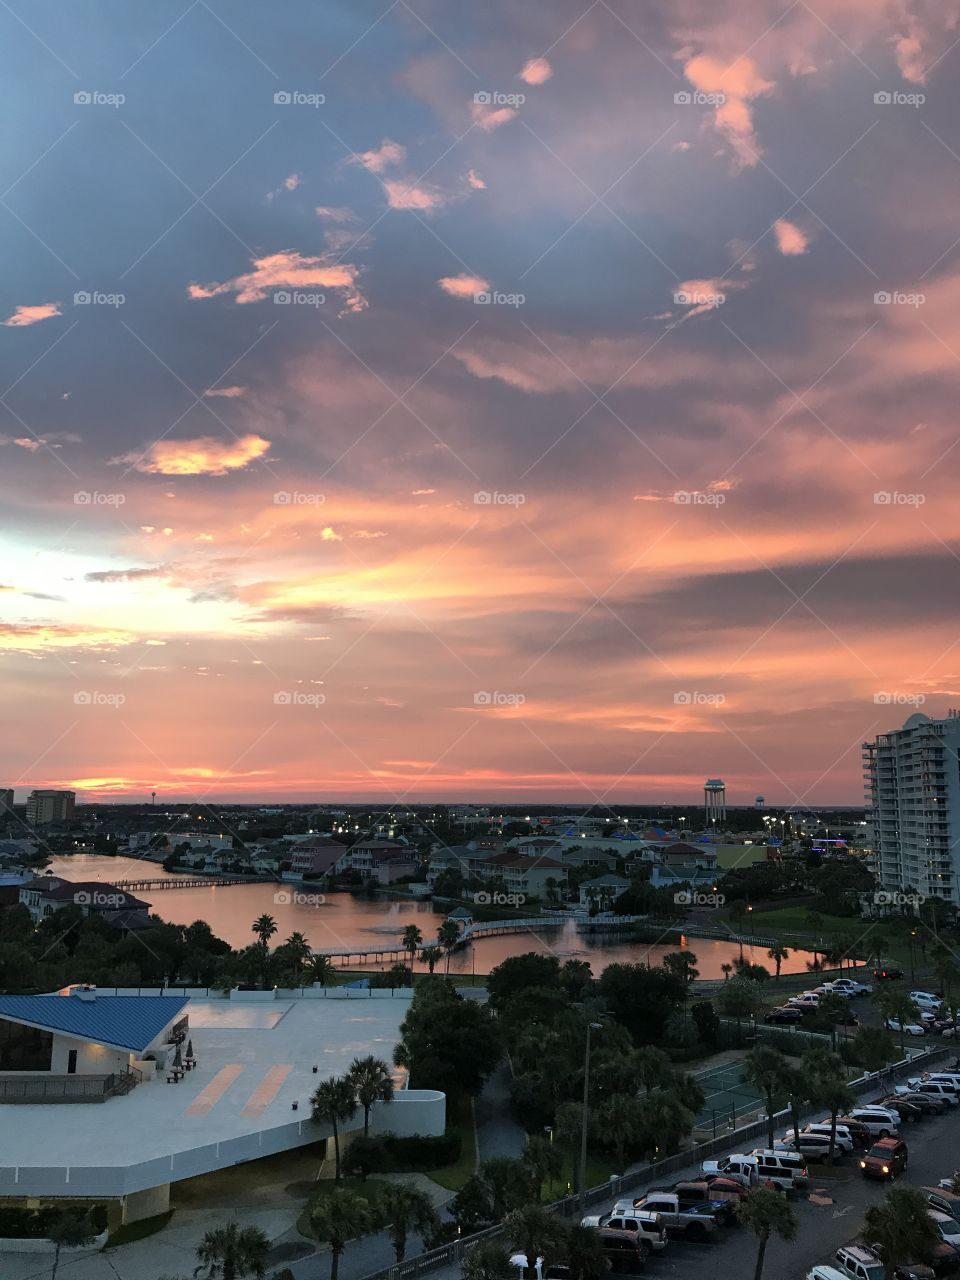 A sunset in Florida is always beautiful.